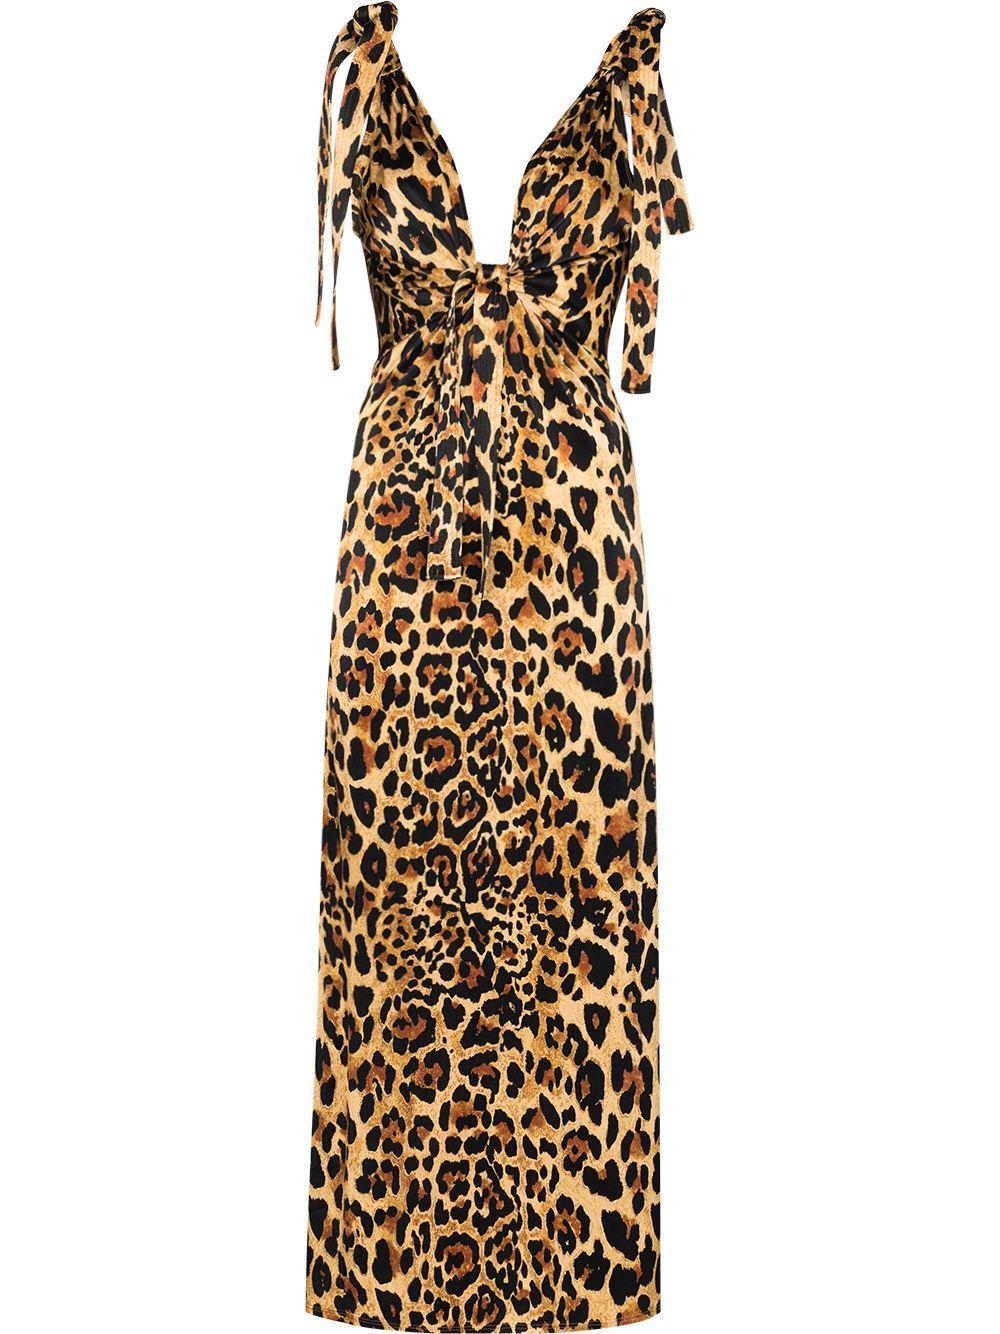 Paco Rabanne Synthetic Leopard Print Maxi Dress in Yellow - Lyst